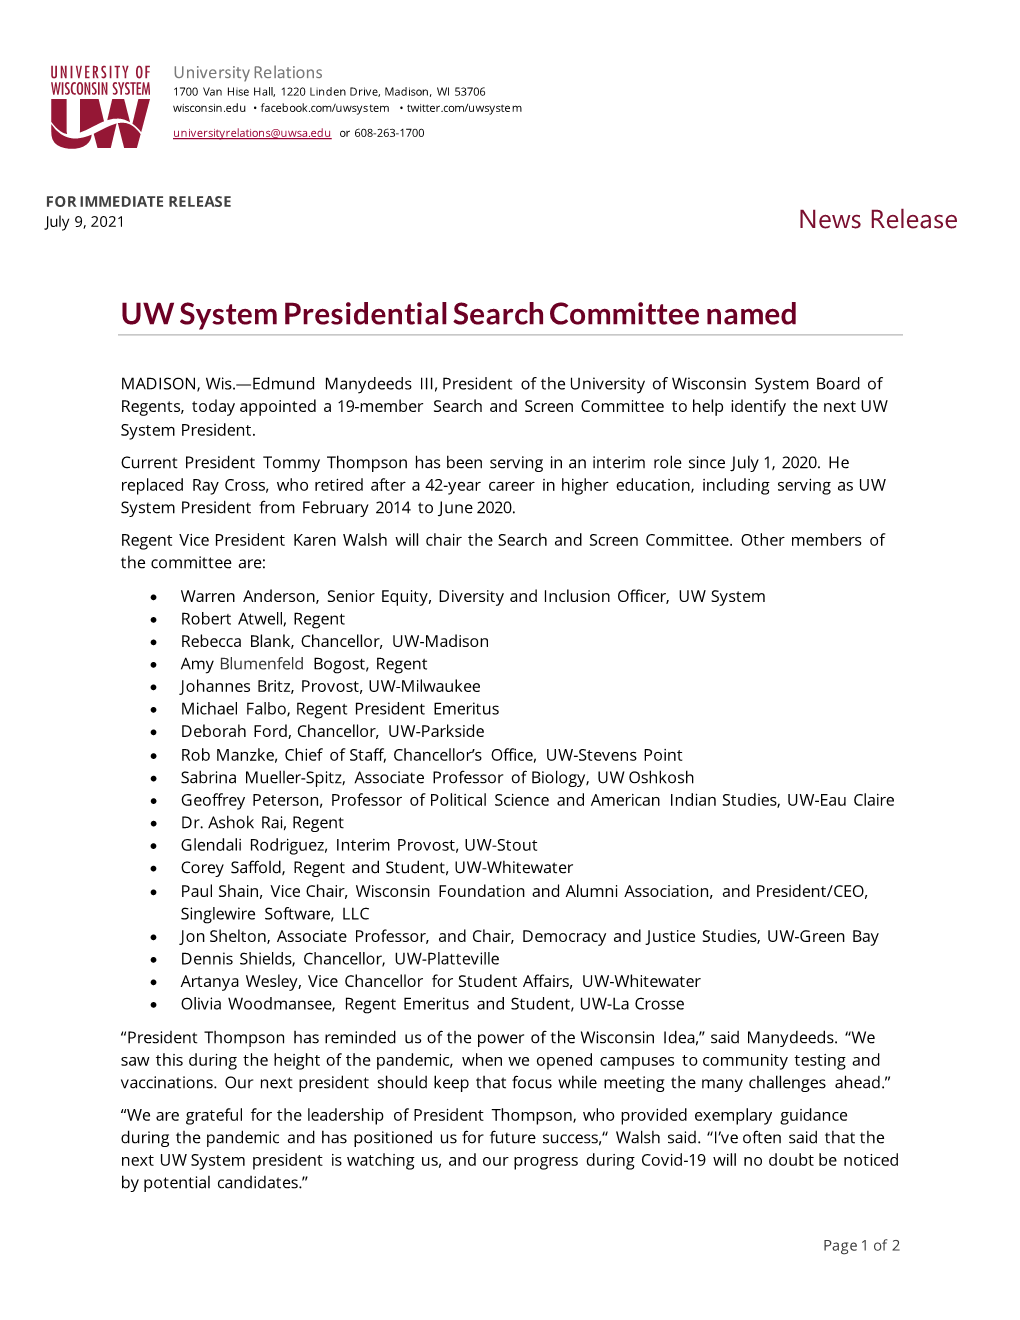 RELEASE: UW System Presidential Search Committee Named